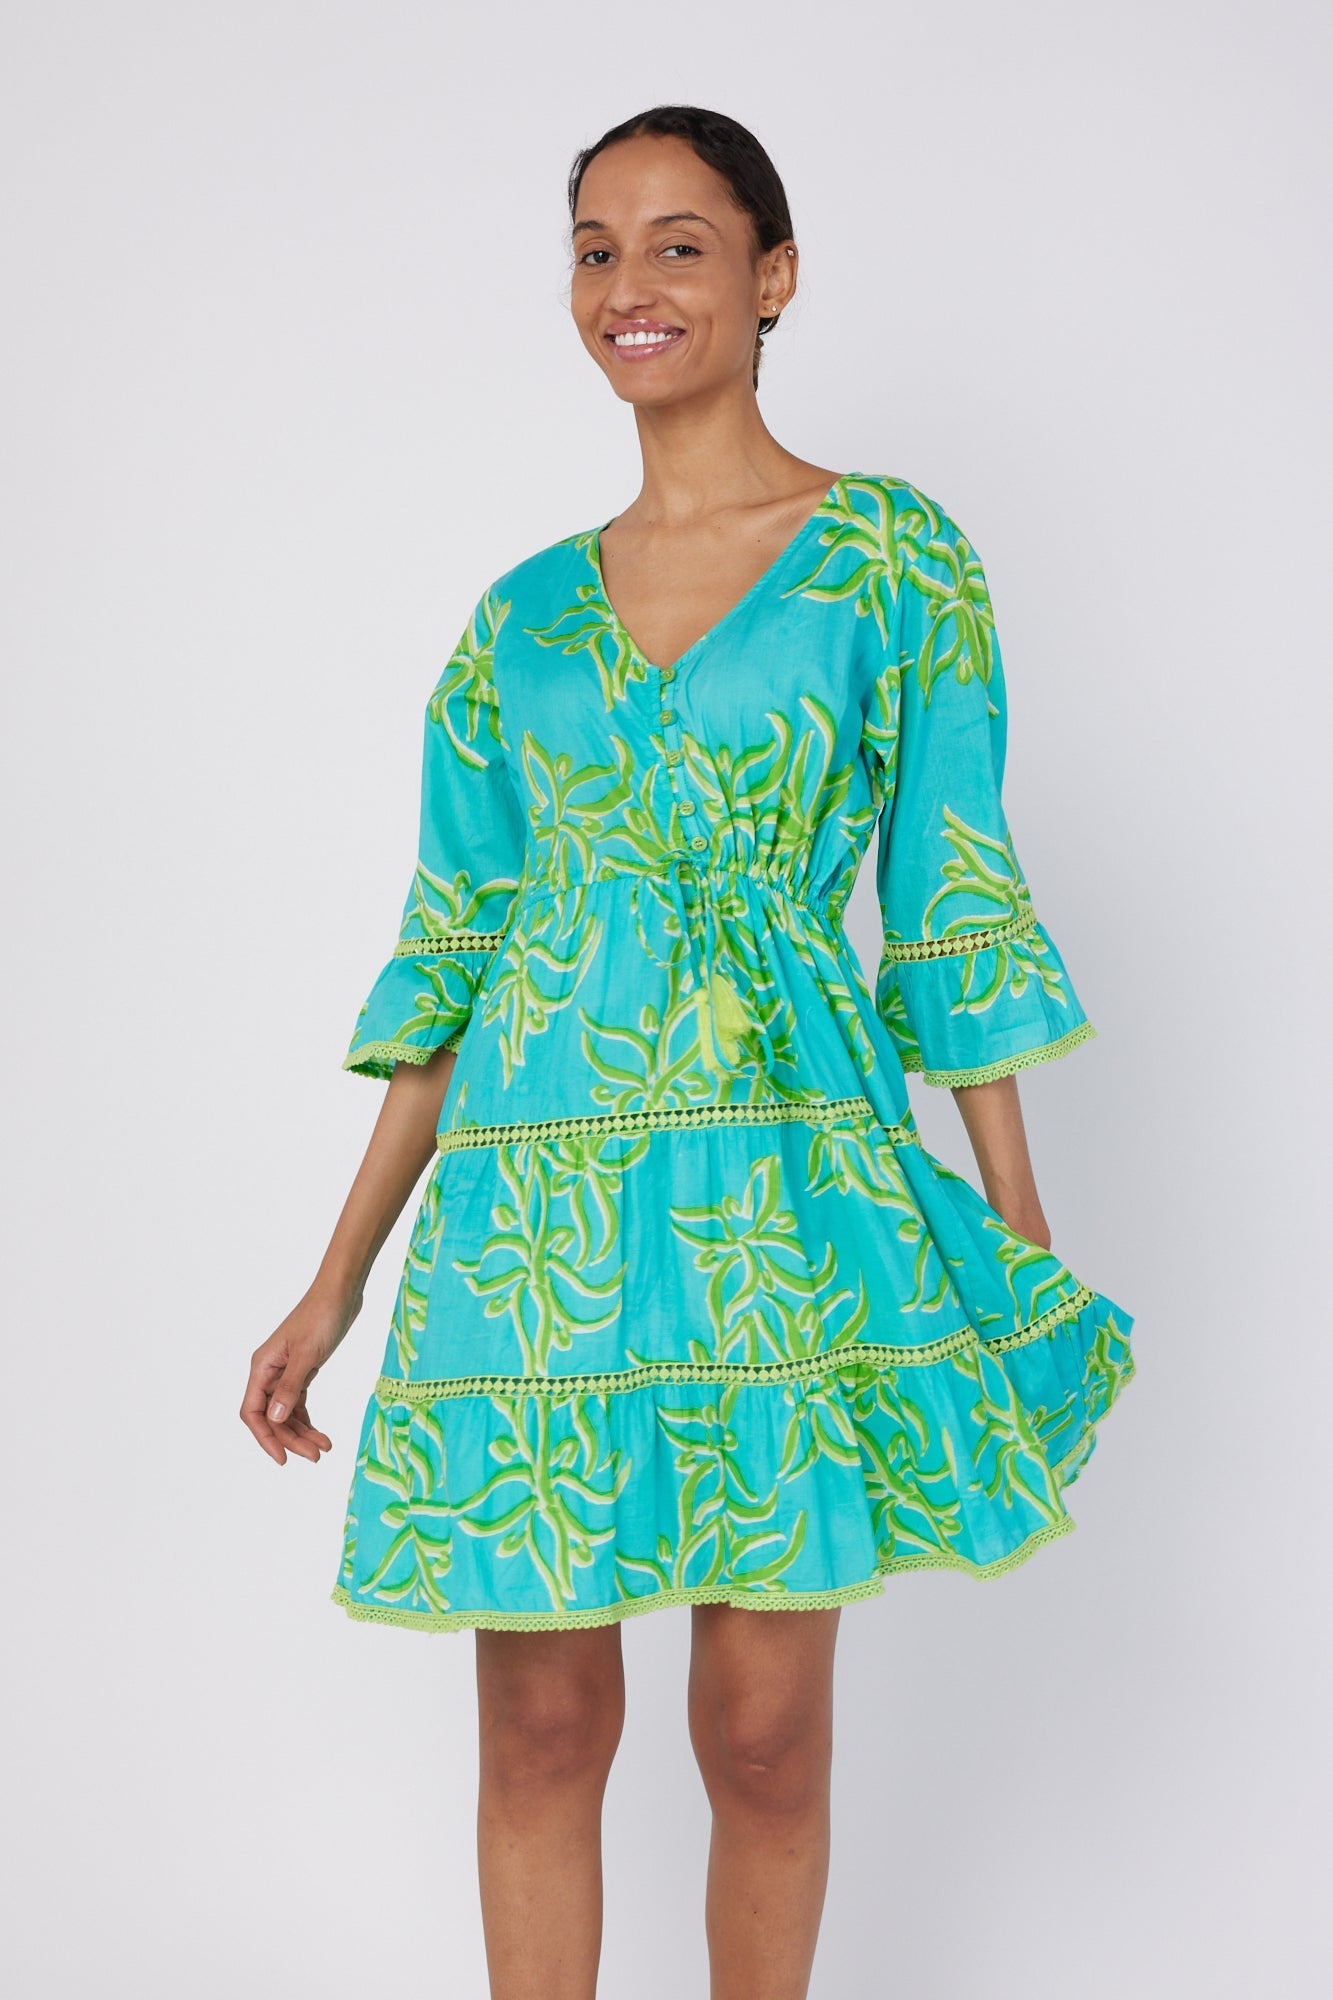 ModaPosa Desideria 3/4 Frill Sleeve Drawstring Empire Knee Length Dress in Green Abstract Flower . Discover women's resort dresses and lifestyle clothing inspired by the Mediterranean. Free worldwide shipping available!